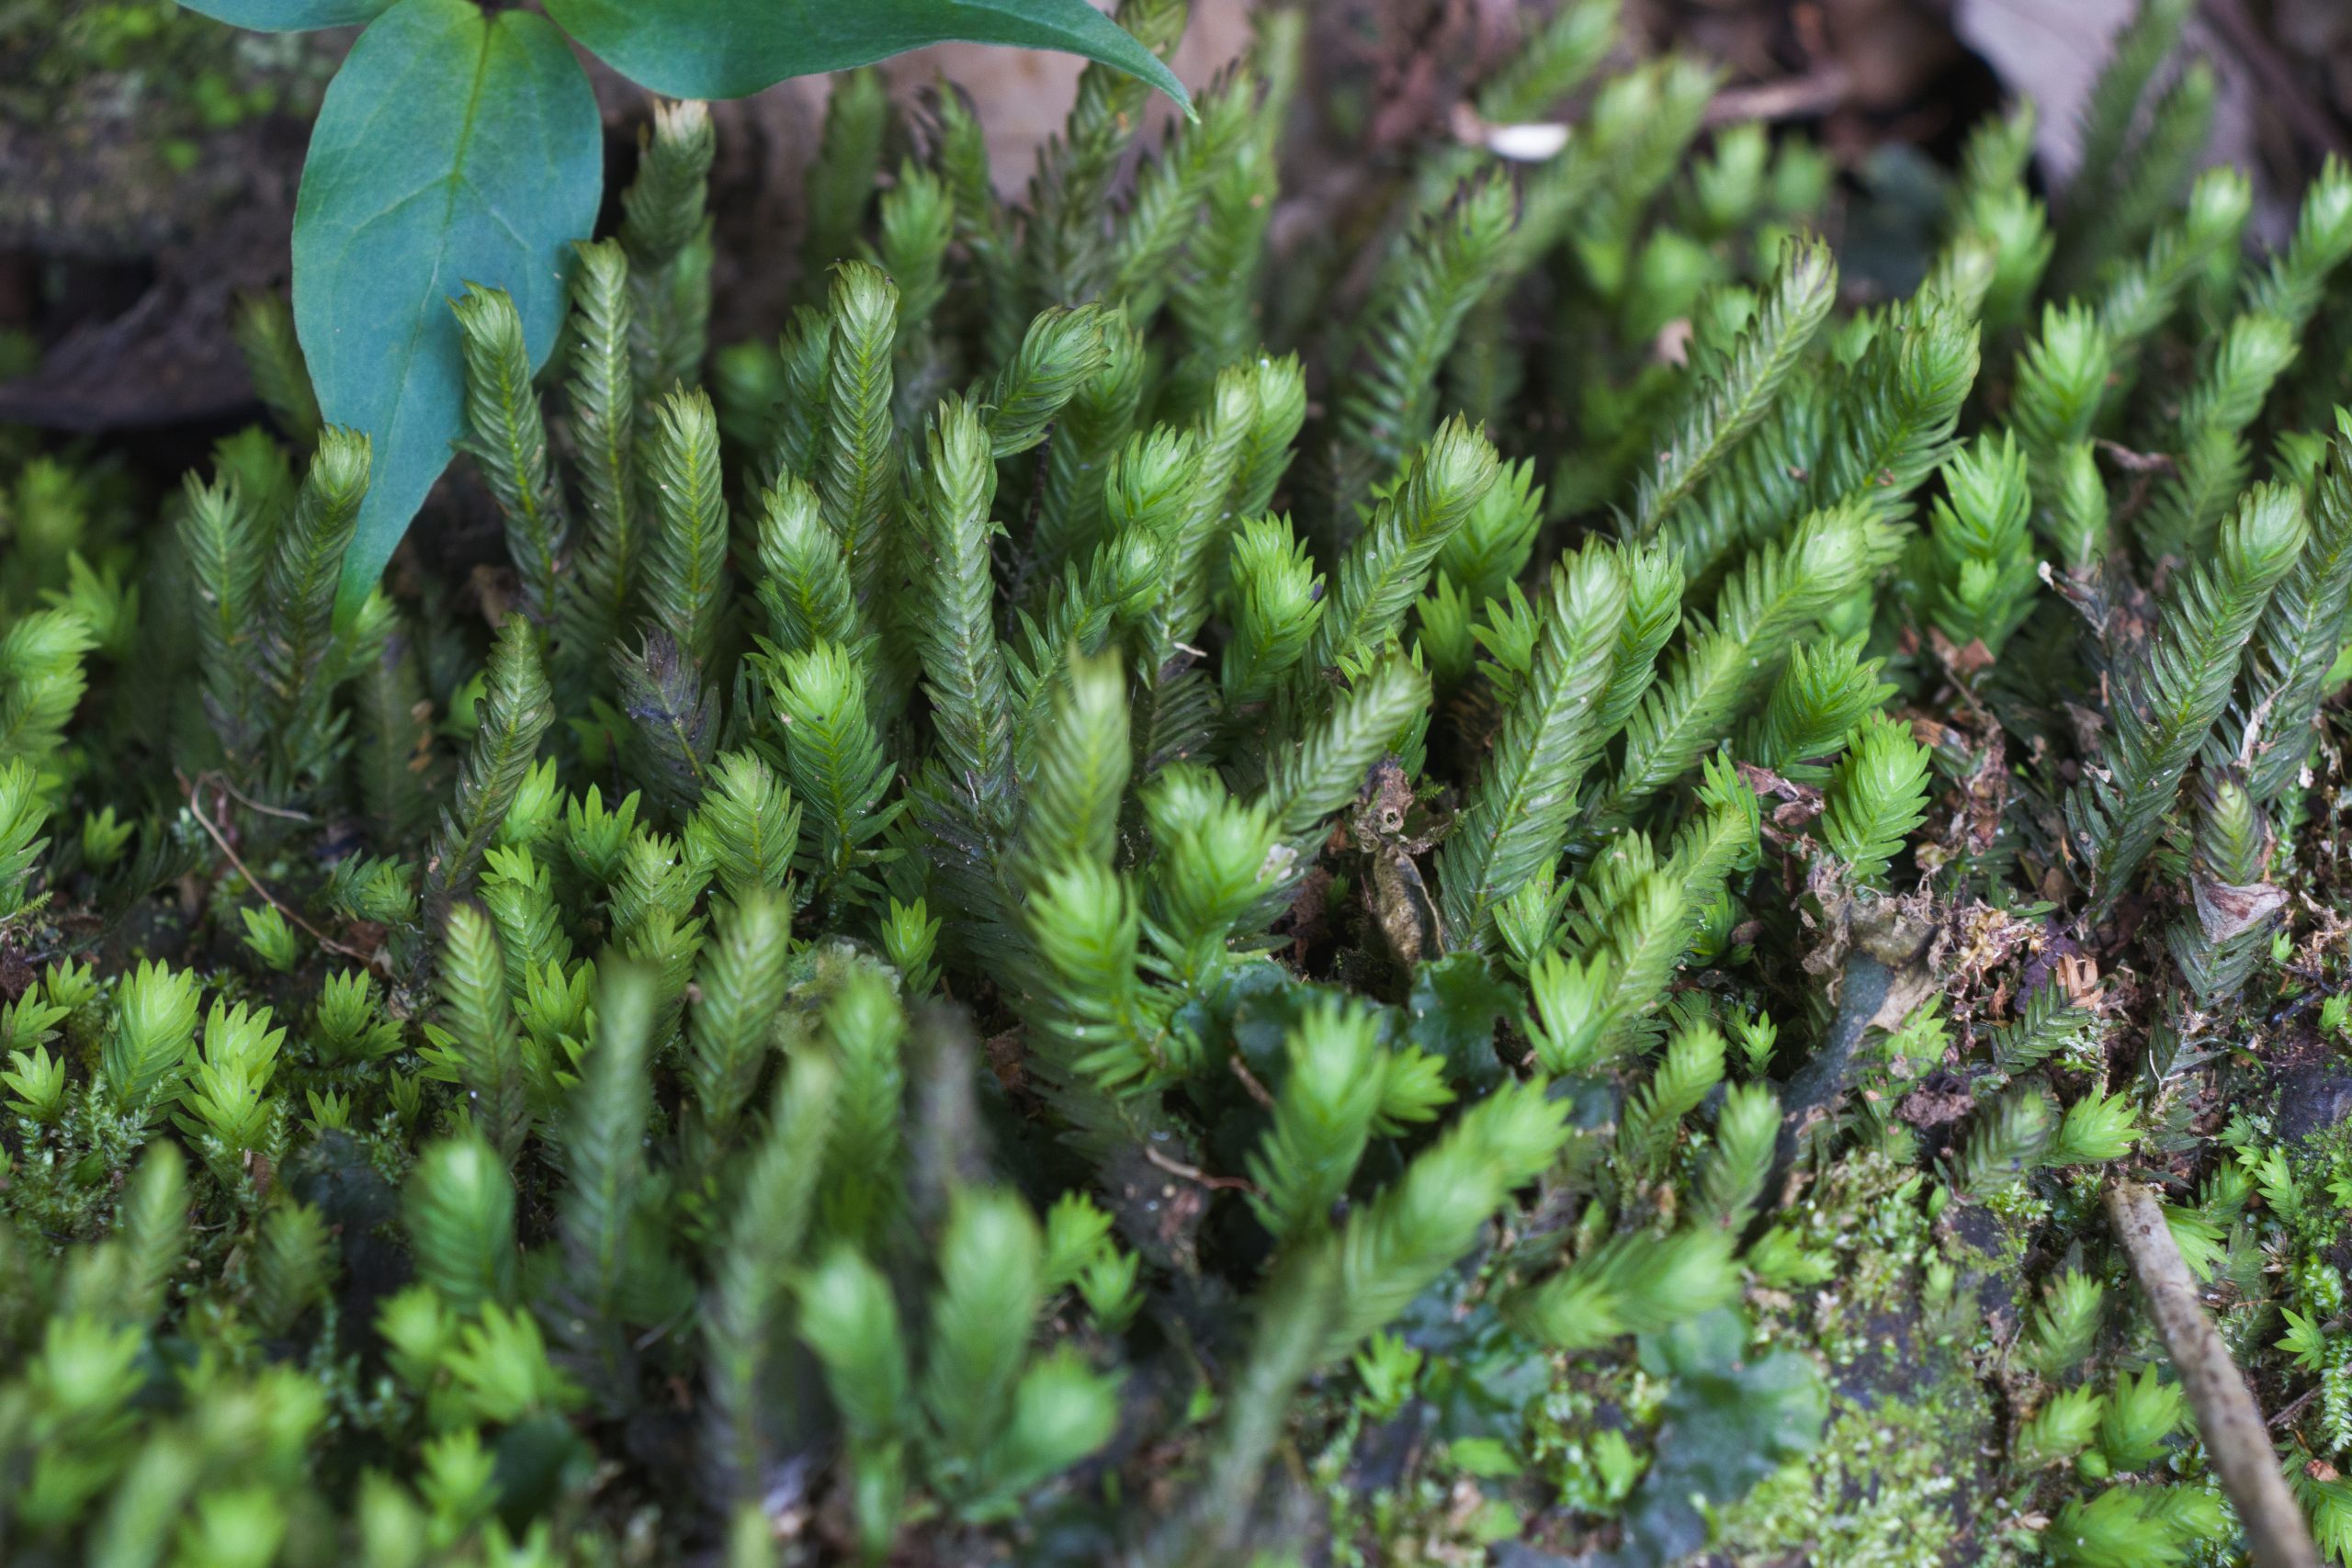 Moss and lichen plants